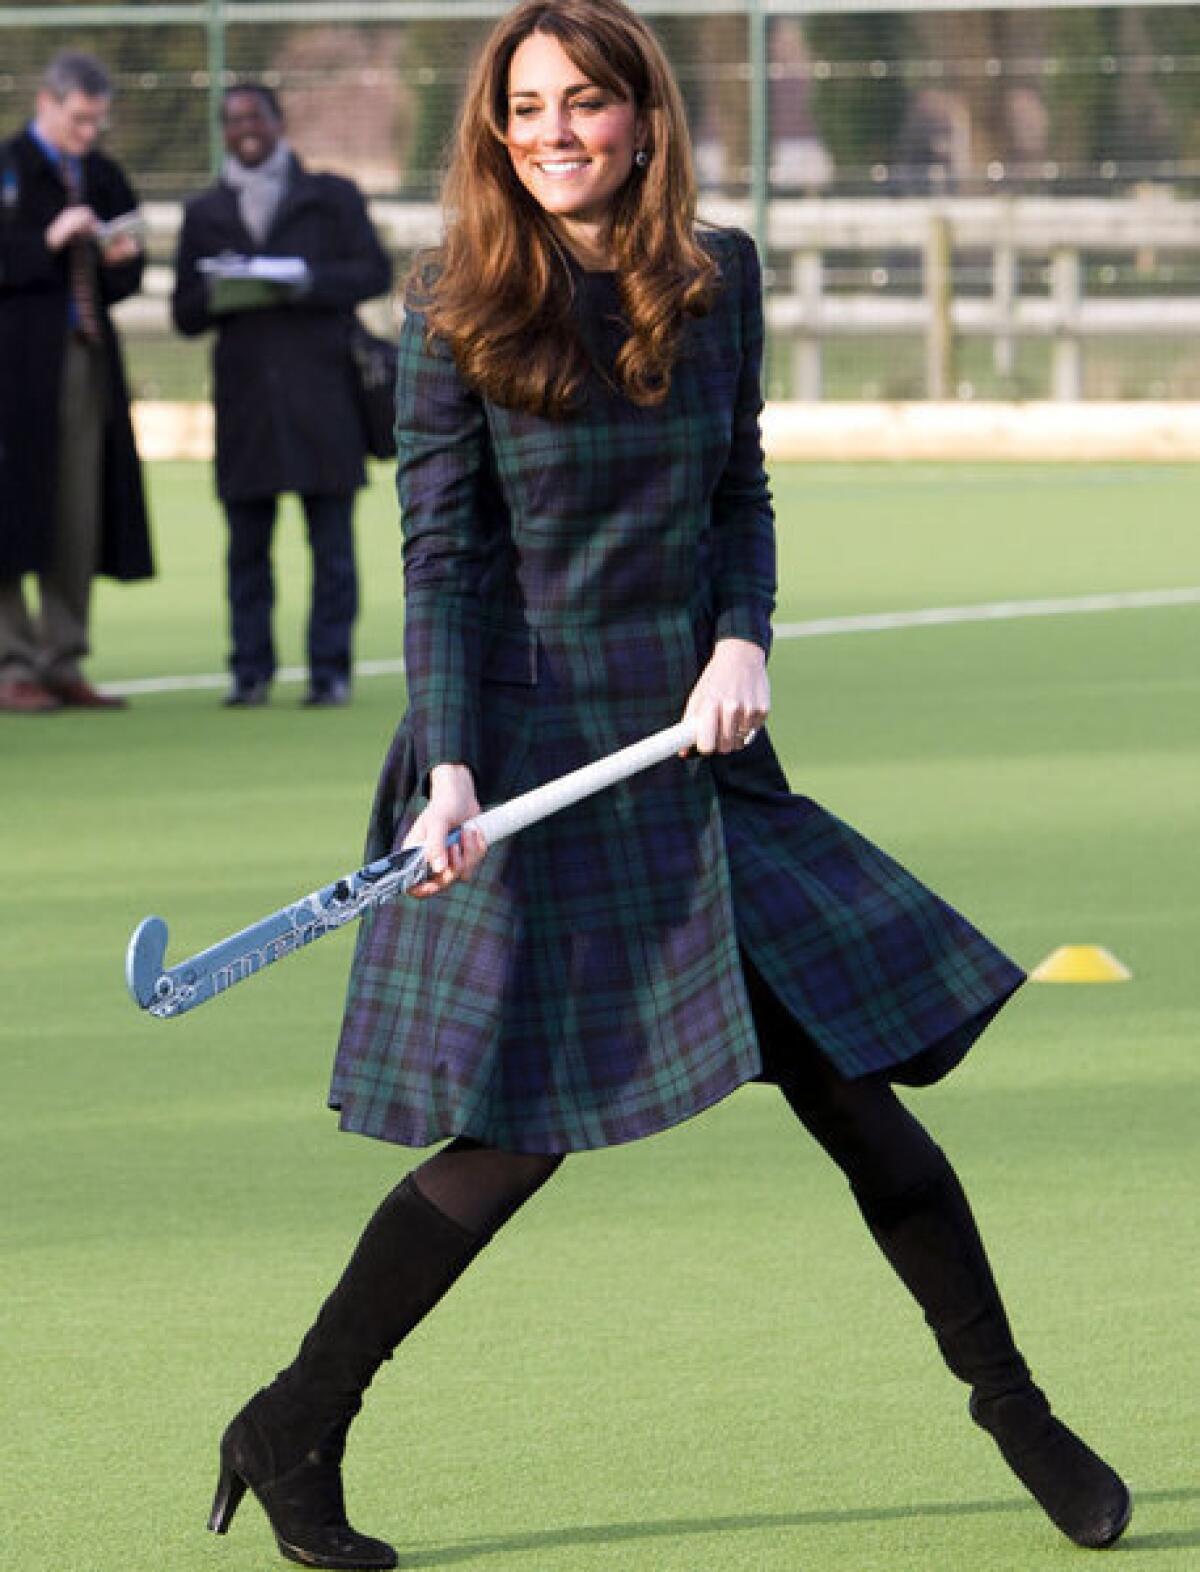 Catherine, Duchess of Cambridge, playing hockey with students Friday during her visit to St Andrew's School in Pangbourne, Berkshire, England.